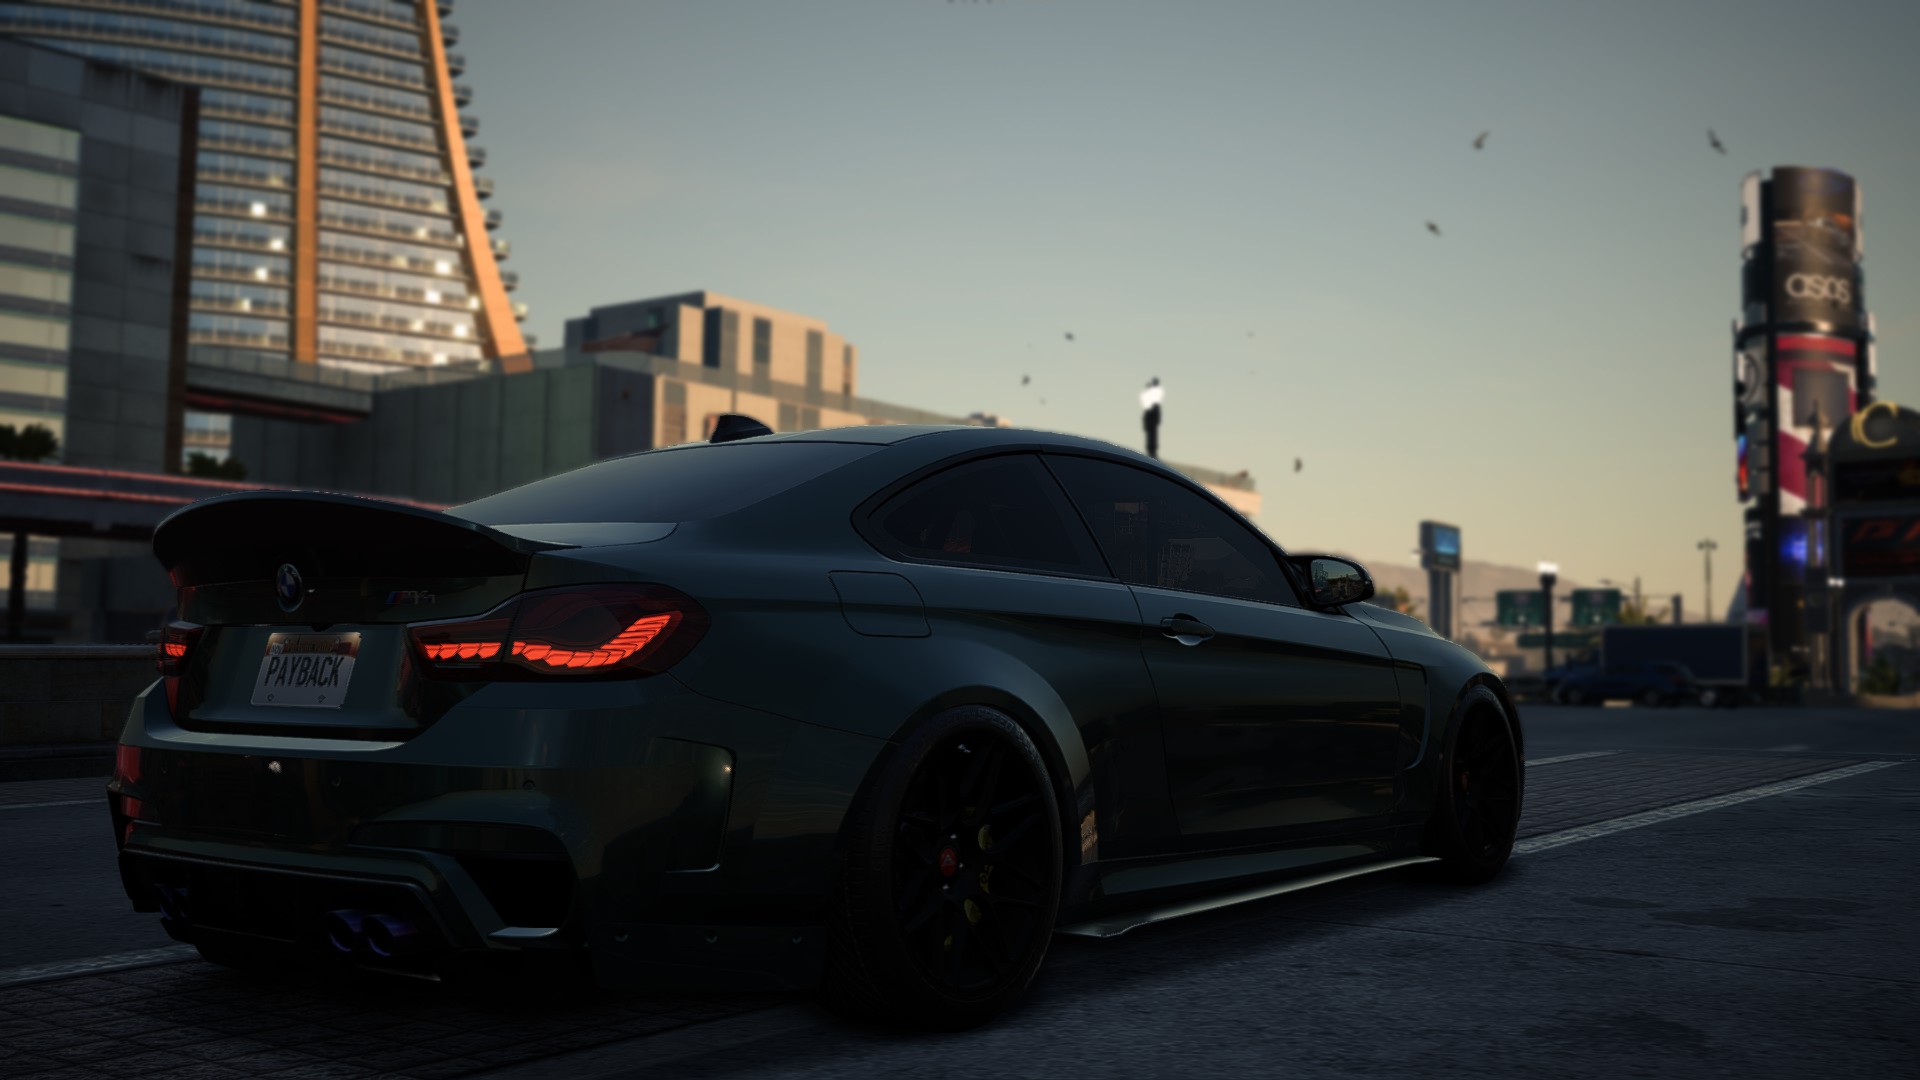 General 1920x1080 Need for Speed Payback Need for Speed screen shot video games PC gaming BMW car BMW F80/F82/F83